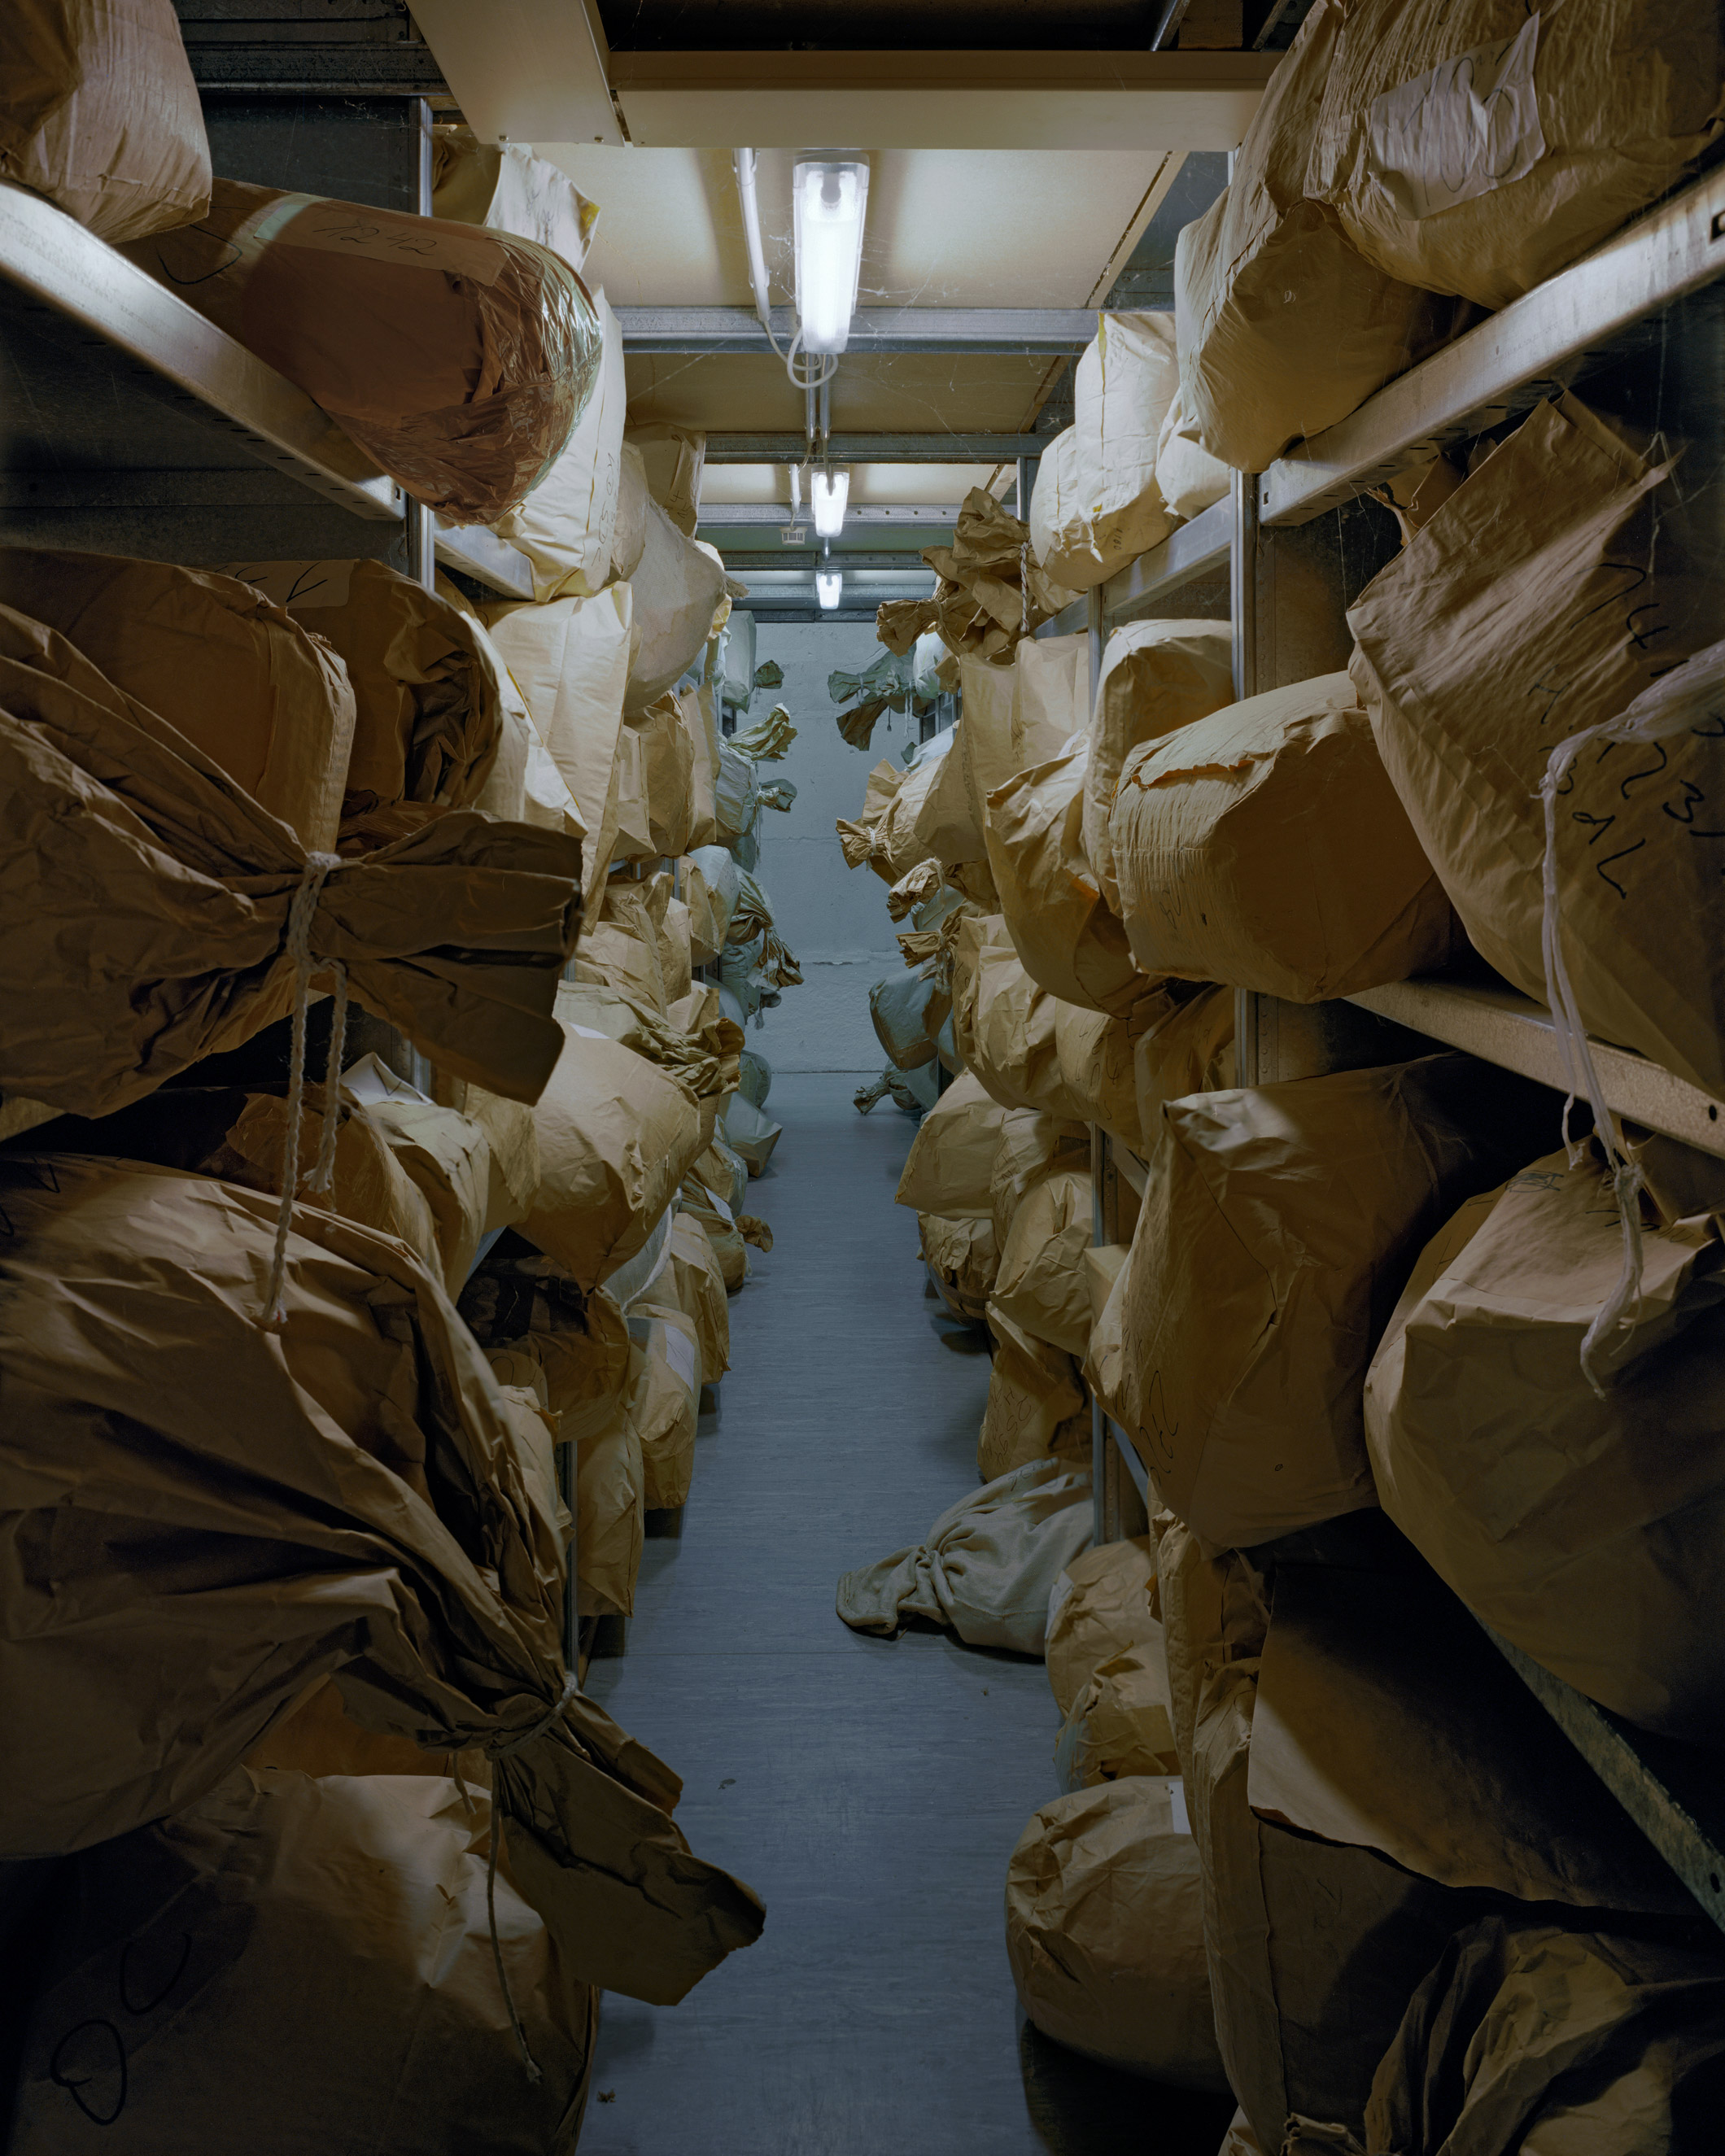 Stasi archives at the Stasi Records Agency in Magdeburg, Germany.